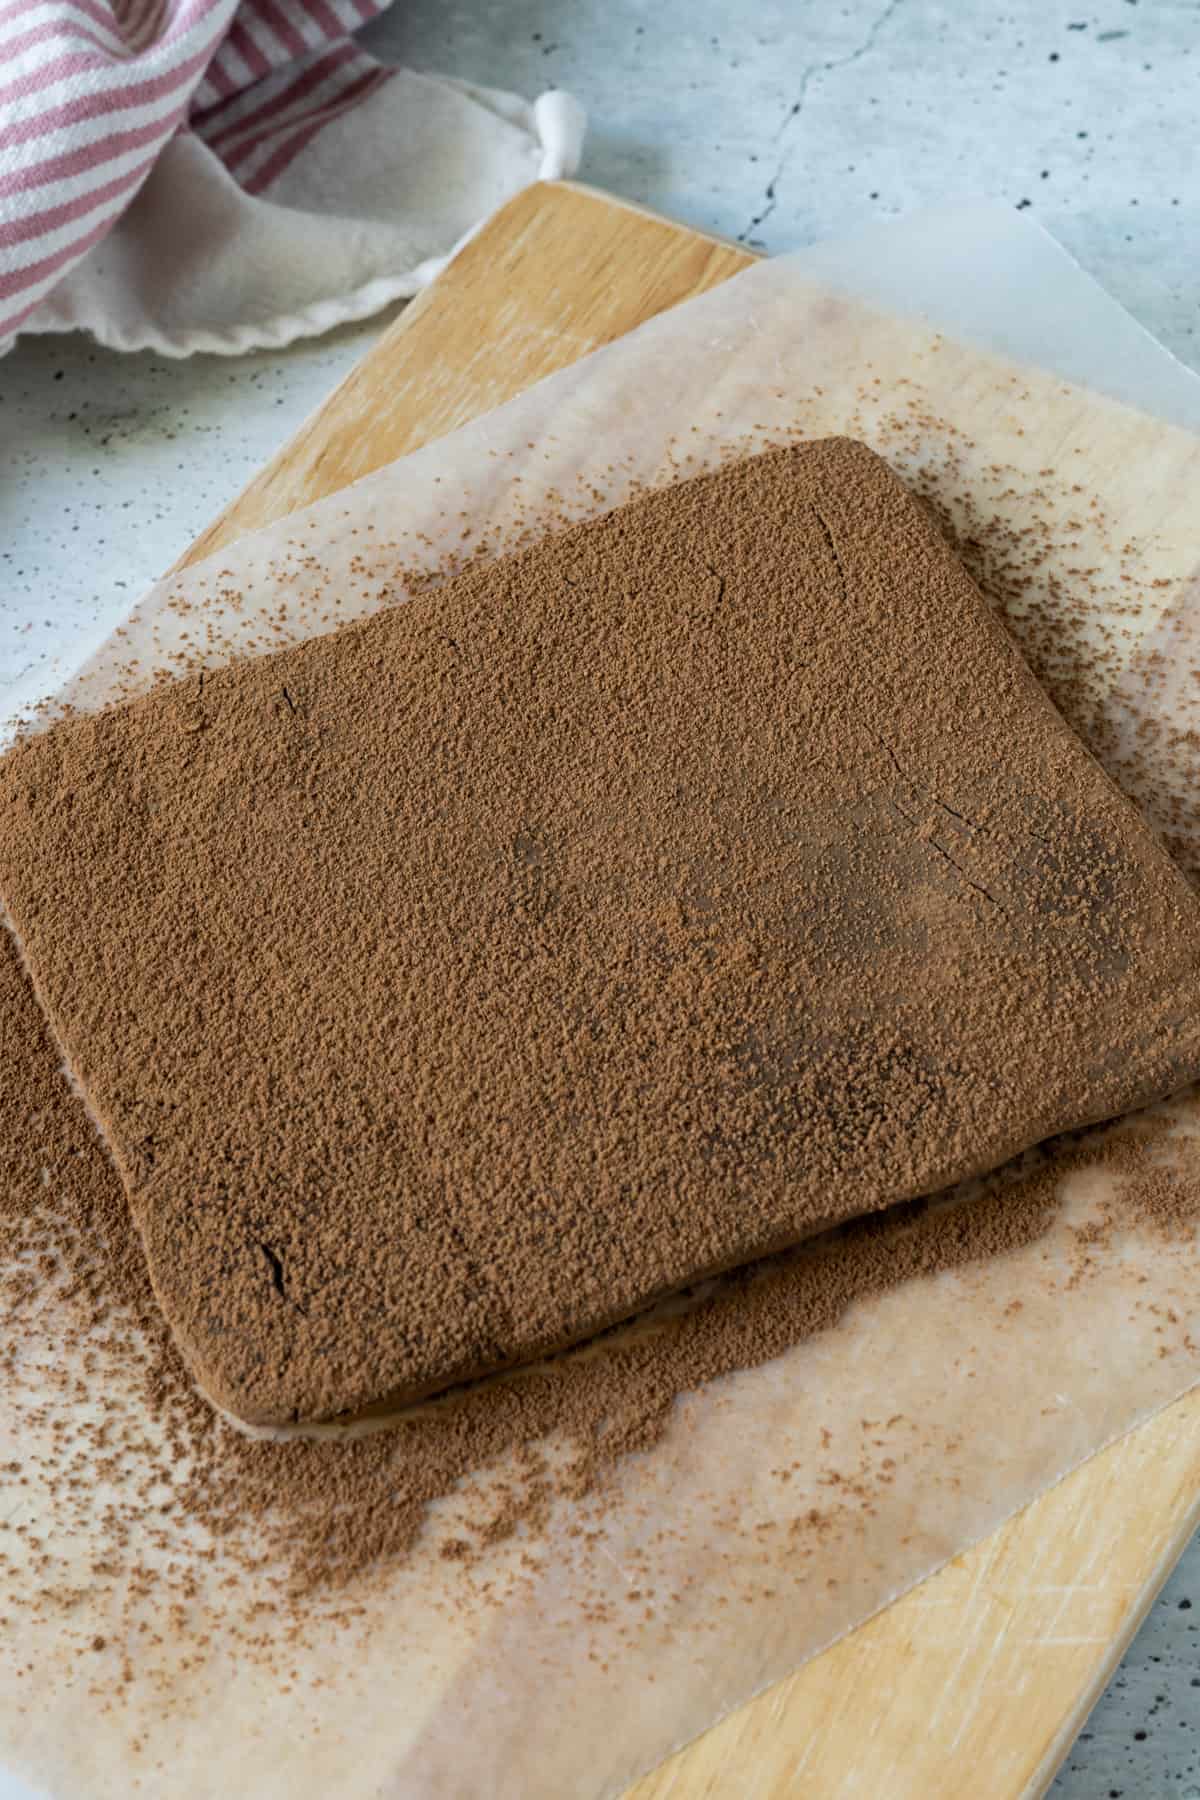 The truffle mixture formed into a rectangle and dusted in cocoa powder.